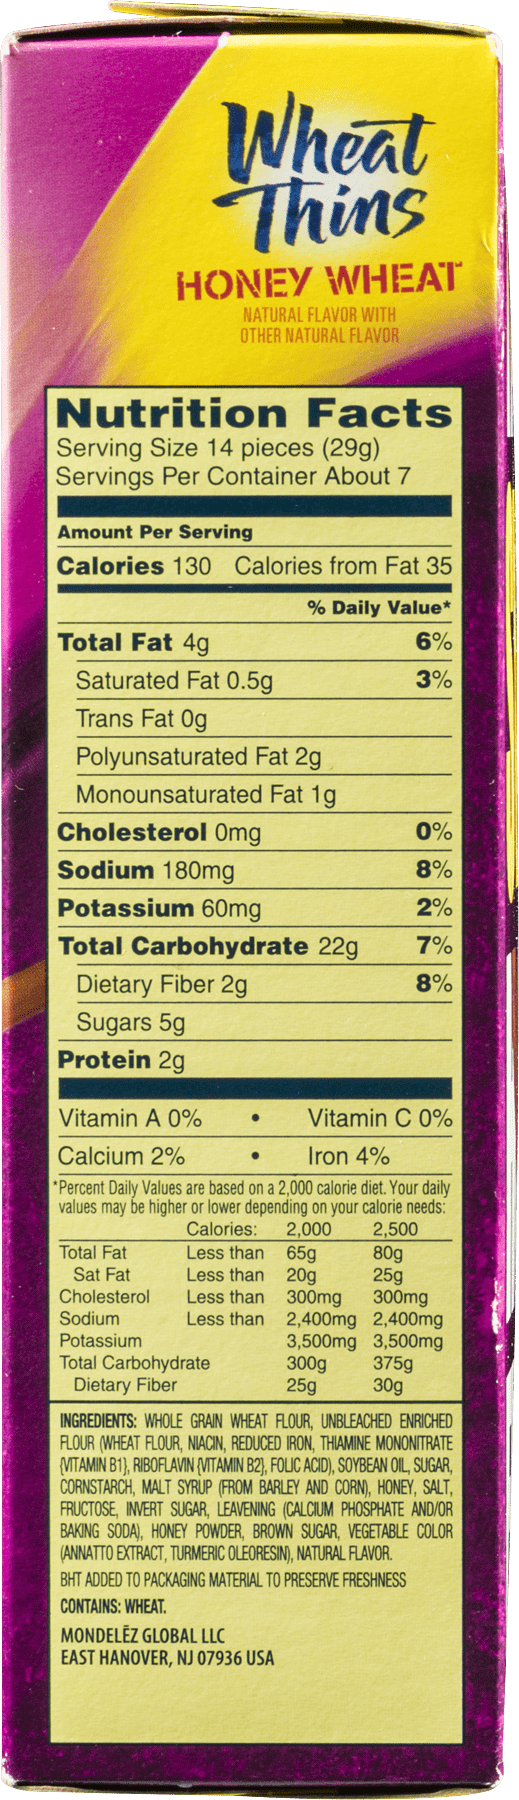 Wheat Thins Nutrition Facts Besto Blog